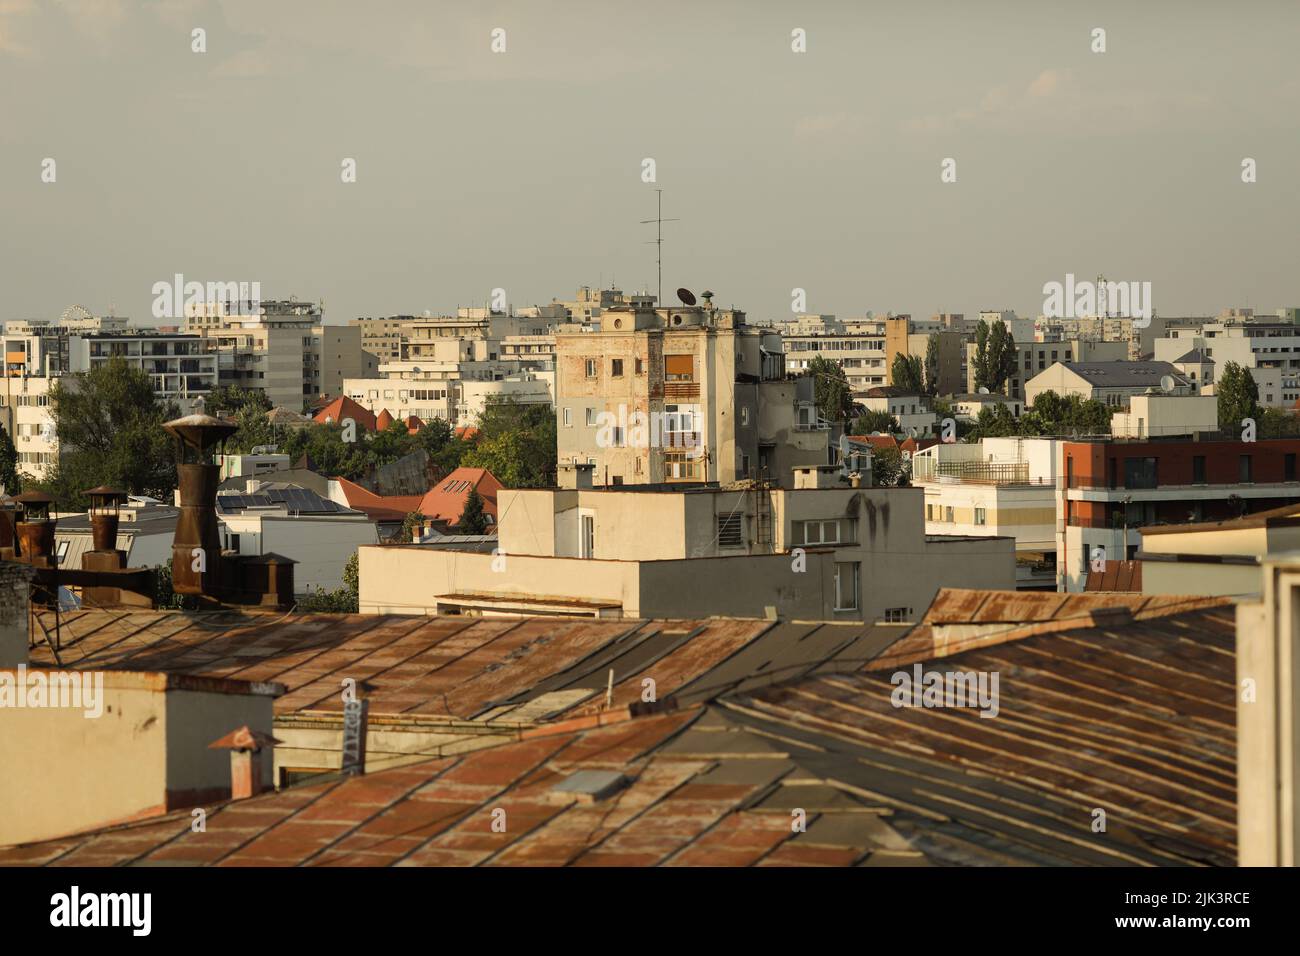 Bucharest, Romania - July 30, 2022: Old part of Bucharest during a summer sunset with many old and ruined buildings. Stock Photo